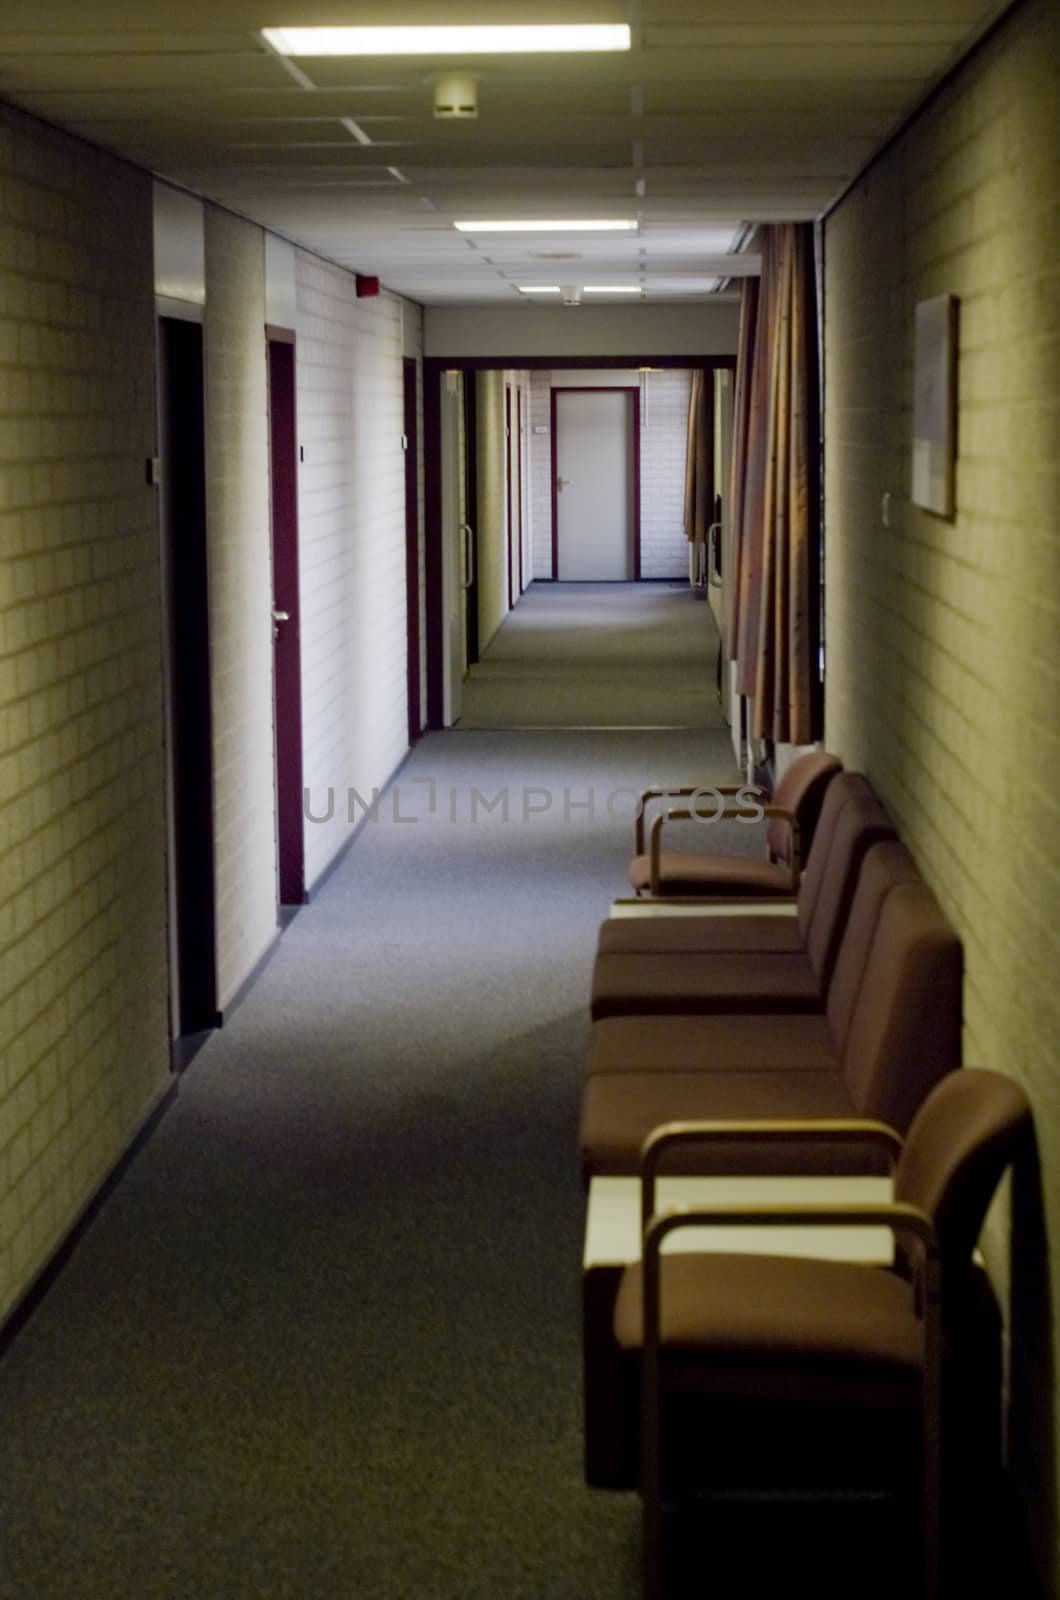 chairs in hallway
